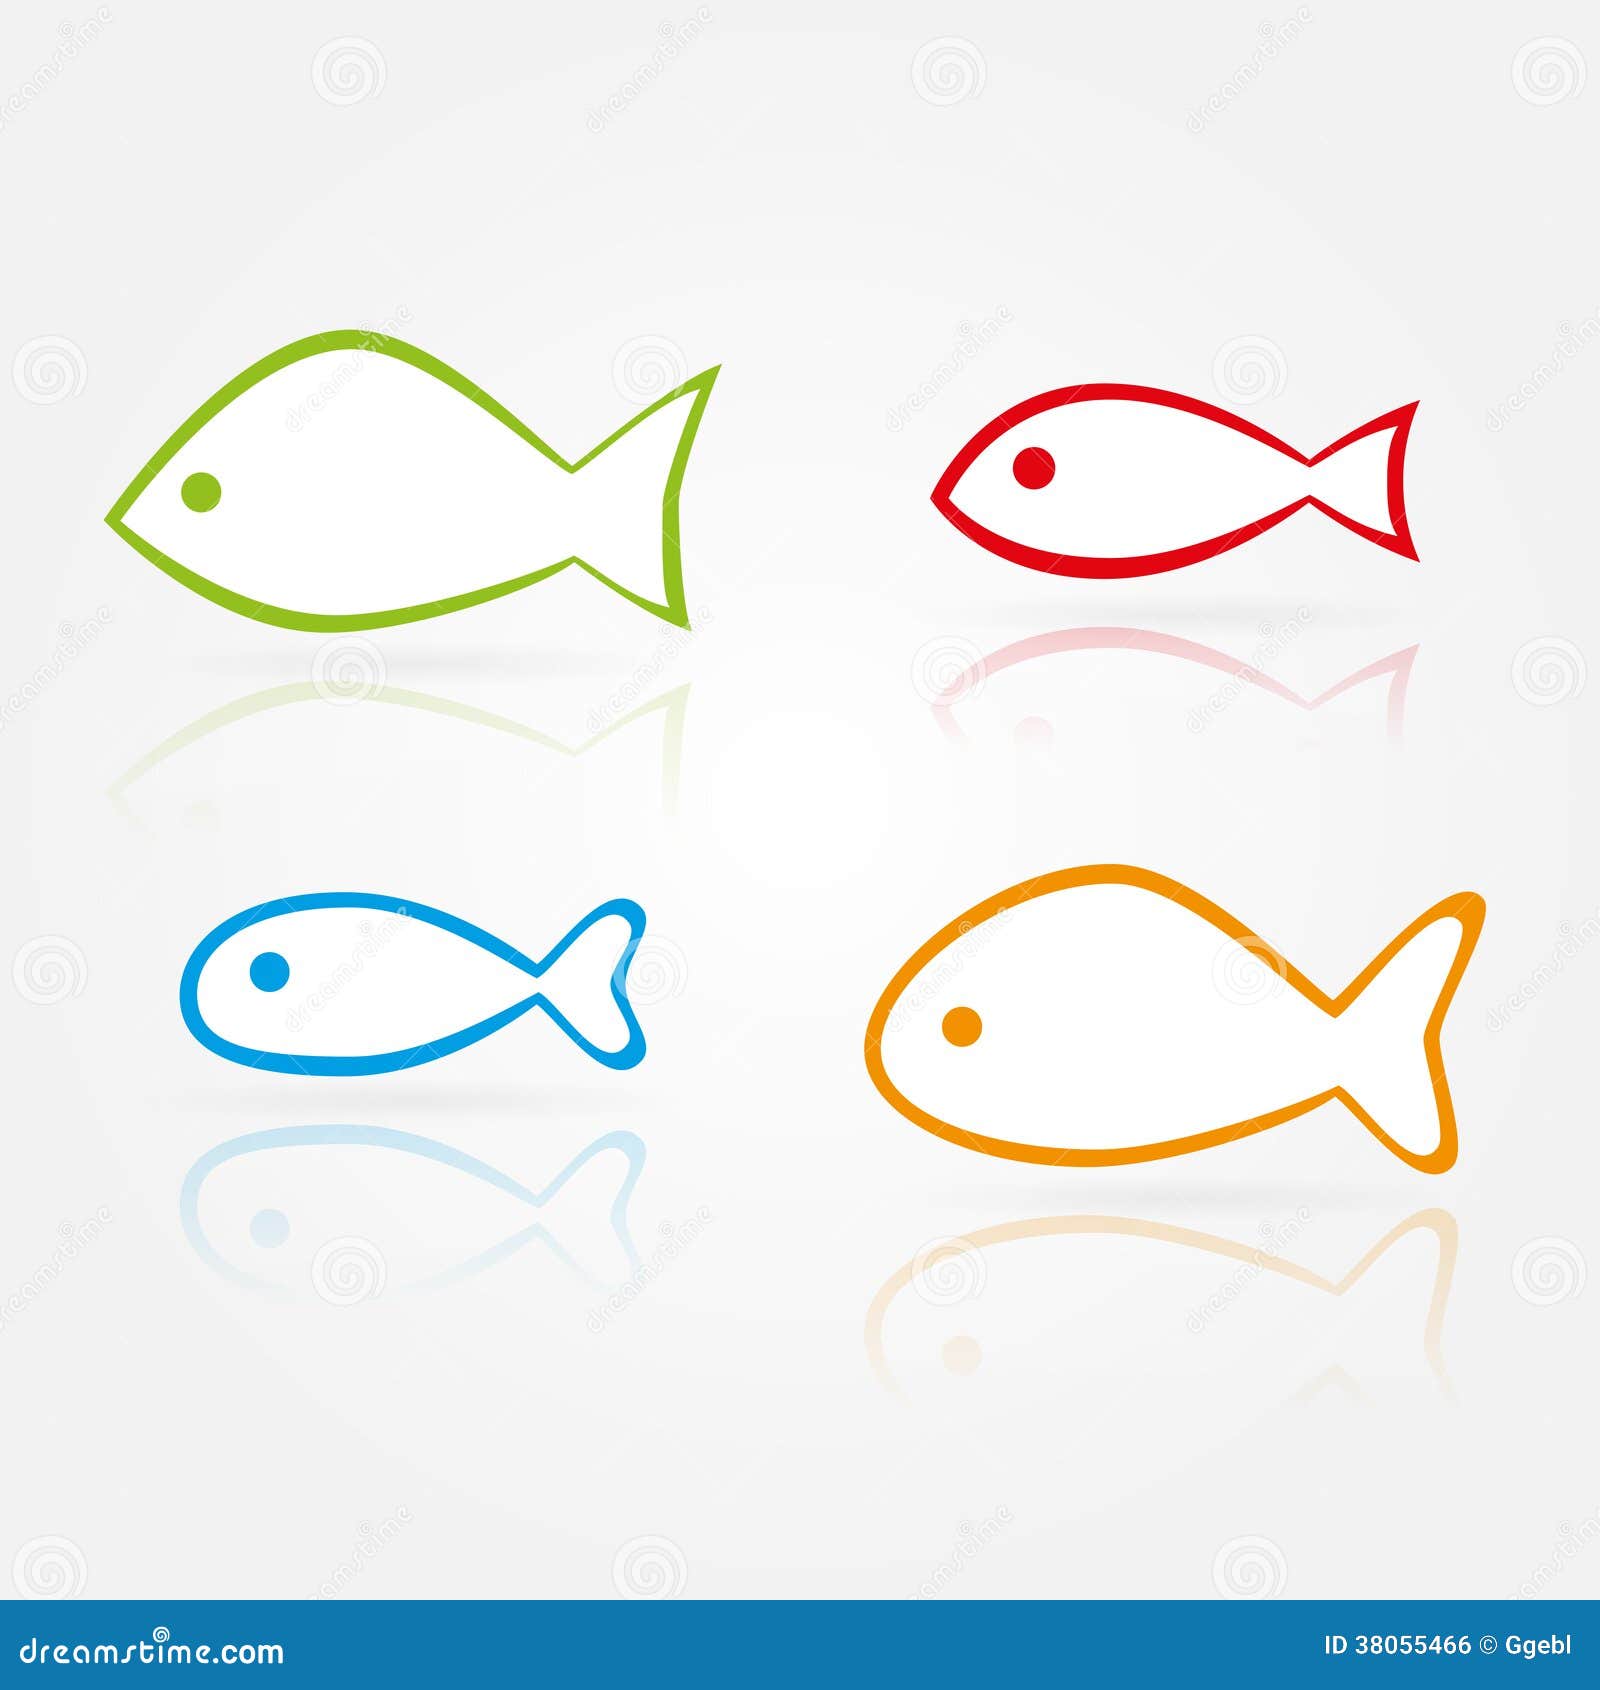 Vector fish silhouettes stock vector. Illustration of shadow